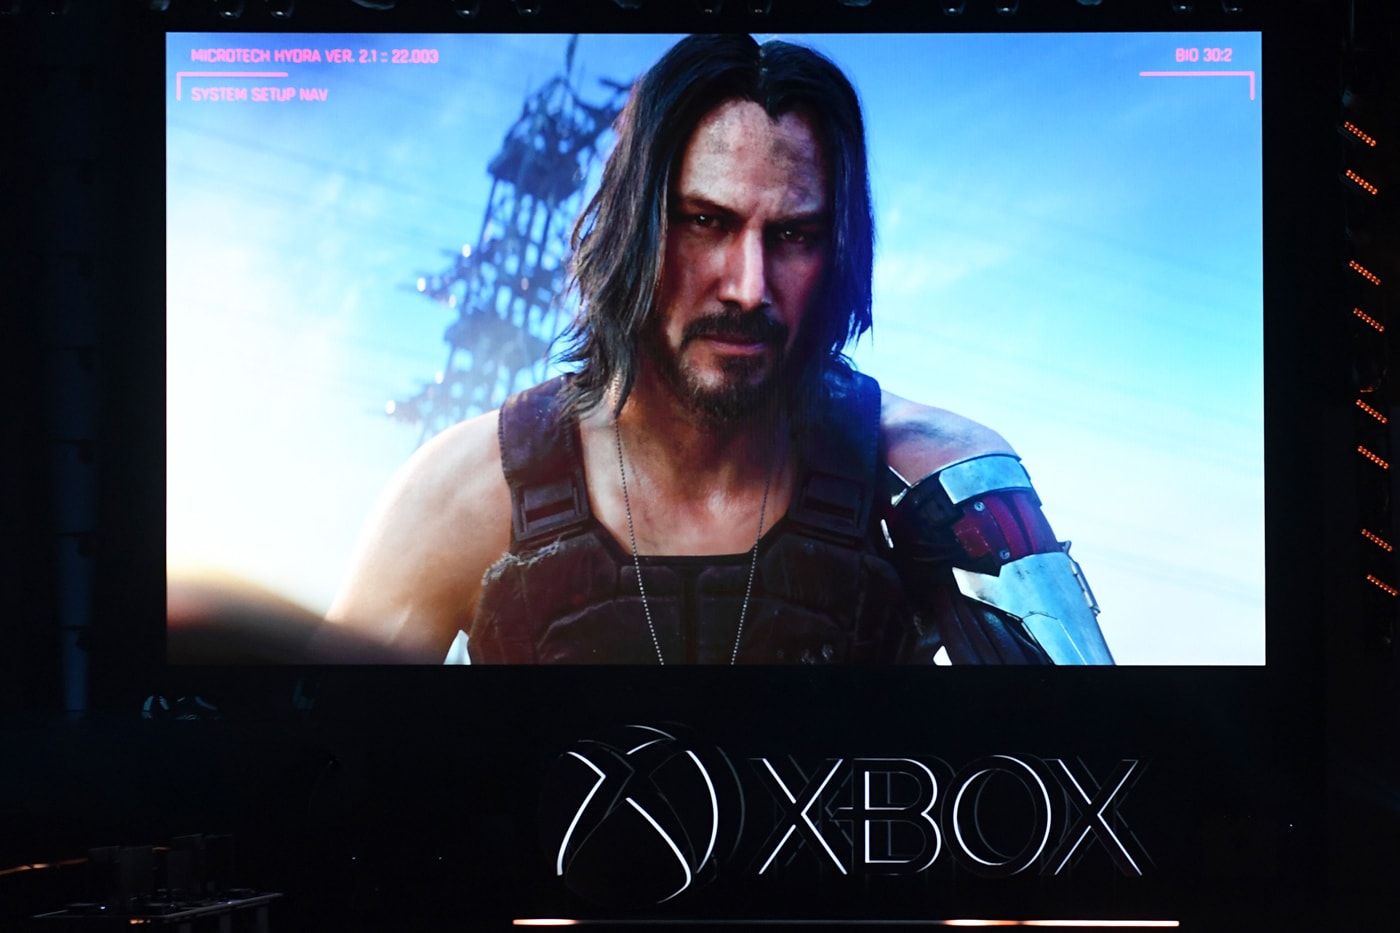 Microsoft E3 2019 Roundup xbox keanu reeves Project Scarlett cyberpunk 2077 star wars jedi fallen order Gears 5 Elden Ring Dragon Ball Z Kakarot Crossfire X Blair Witch Halo Infinite Minecraft Dungeons Tales of Arise Dying Light 2 Phantasy Star Online 2 Battletoads Flight Simulator The Outer Worlds Bleeding Edge Psychonauts 2 Age of Empires II: Definitive Edition orza Horizon 4’s Lego Speed Champions Spiritfarer The Legend of Wright Lego Star Wars: The Skywalker Saga  12 minutes Way to the Woods  Gears of Pop!.  Borderlands 3 Wasteland 3  Dead Static Drive Pathologic 2 Star Renegades The Good Life Totally Accurate Battle Simulator Creature in the Well Killer Queen Black Riverbond Unto the End Blazing Chrome Felix the Reaper Undermine Supermarket Shriek Secret Neighbor Ikenfell Lord of the Rings Living Card Game Totem Teller Cross Code Batman Arkham Knight Metro Exodus Hollow Knight Commander Lilith and the Fight For Sanctuary Borderlands The Handsome Collection